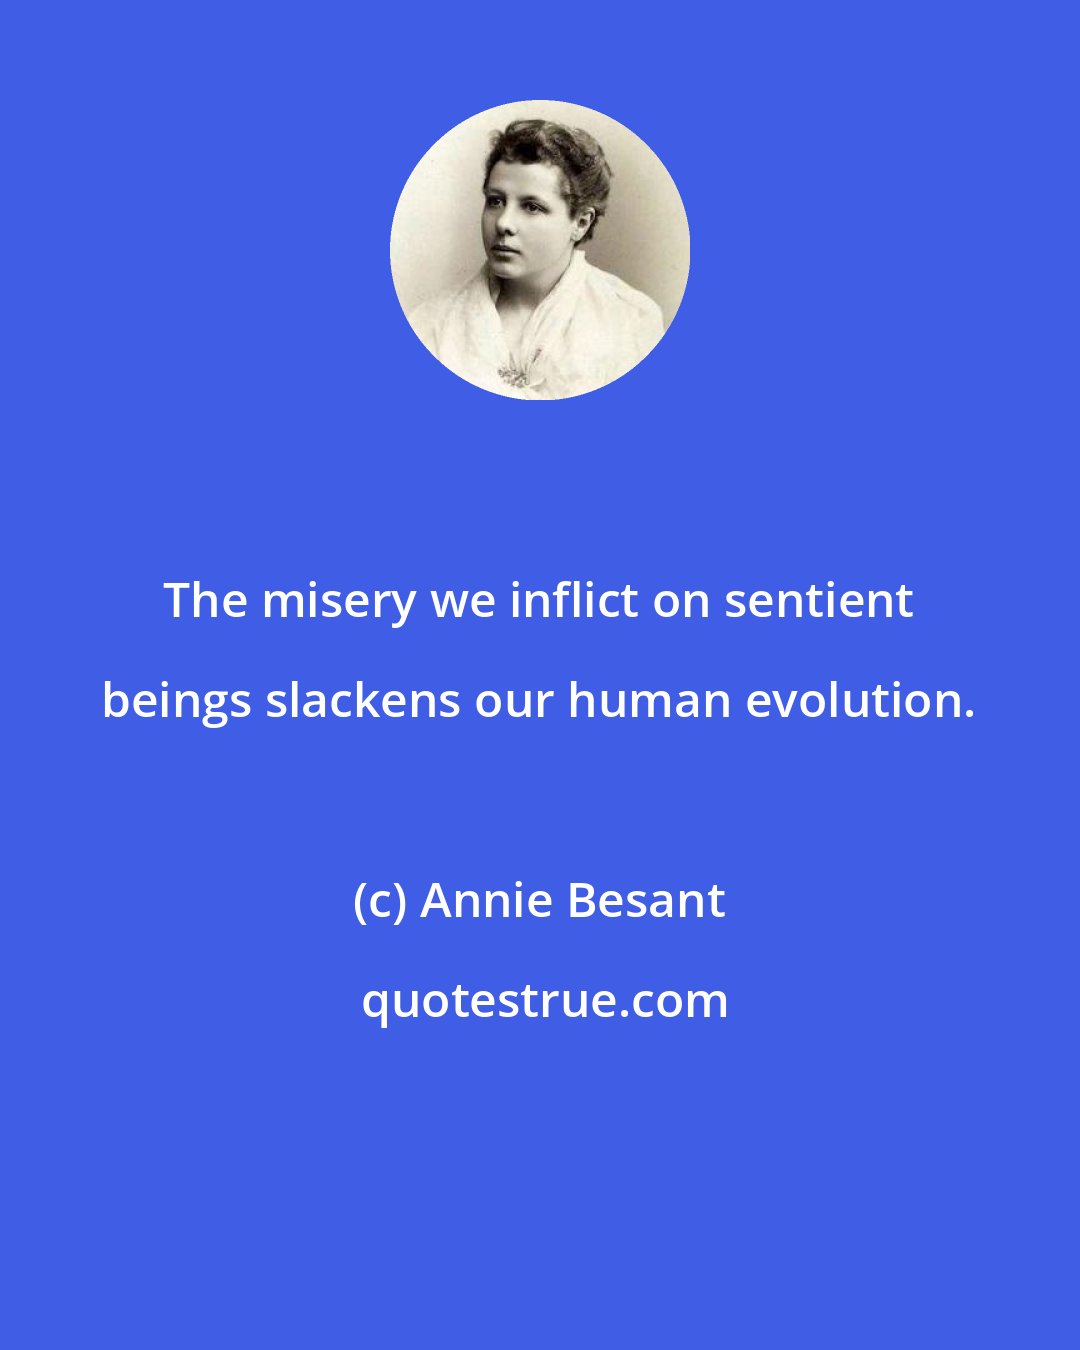 Annie Besant: The misery we inflict on sentient beings slackens our human evolution.